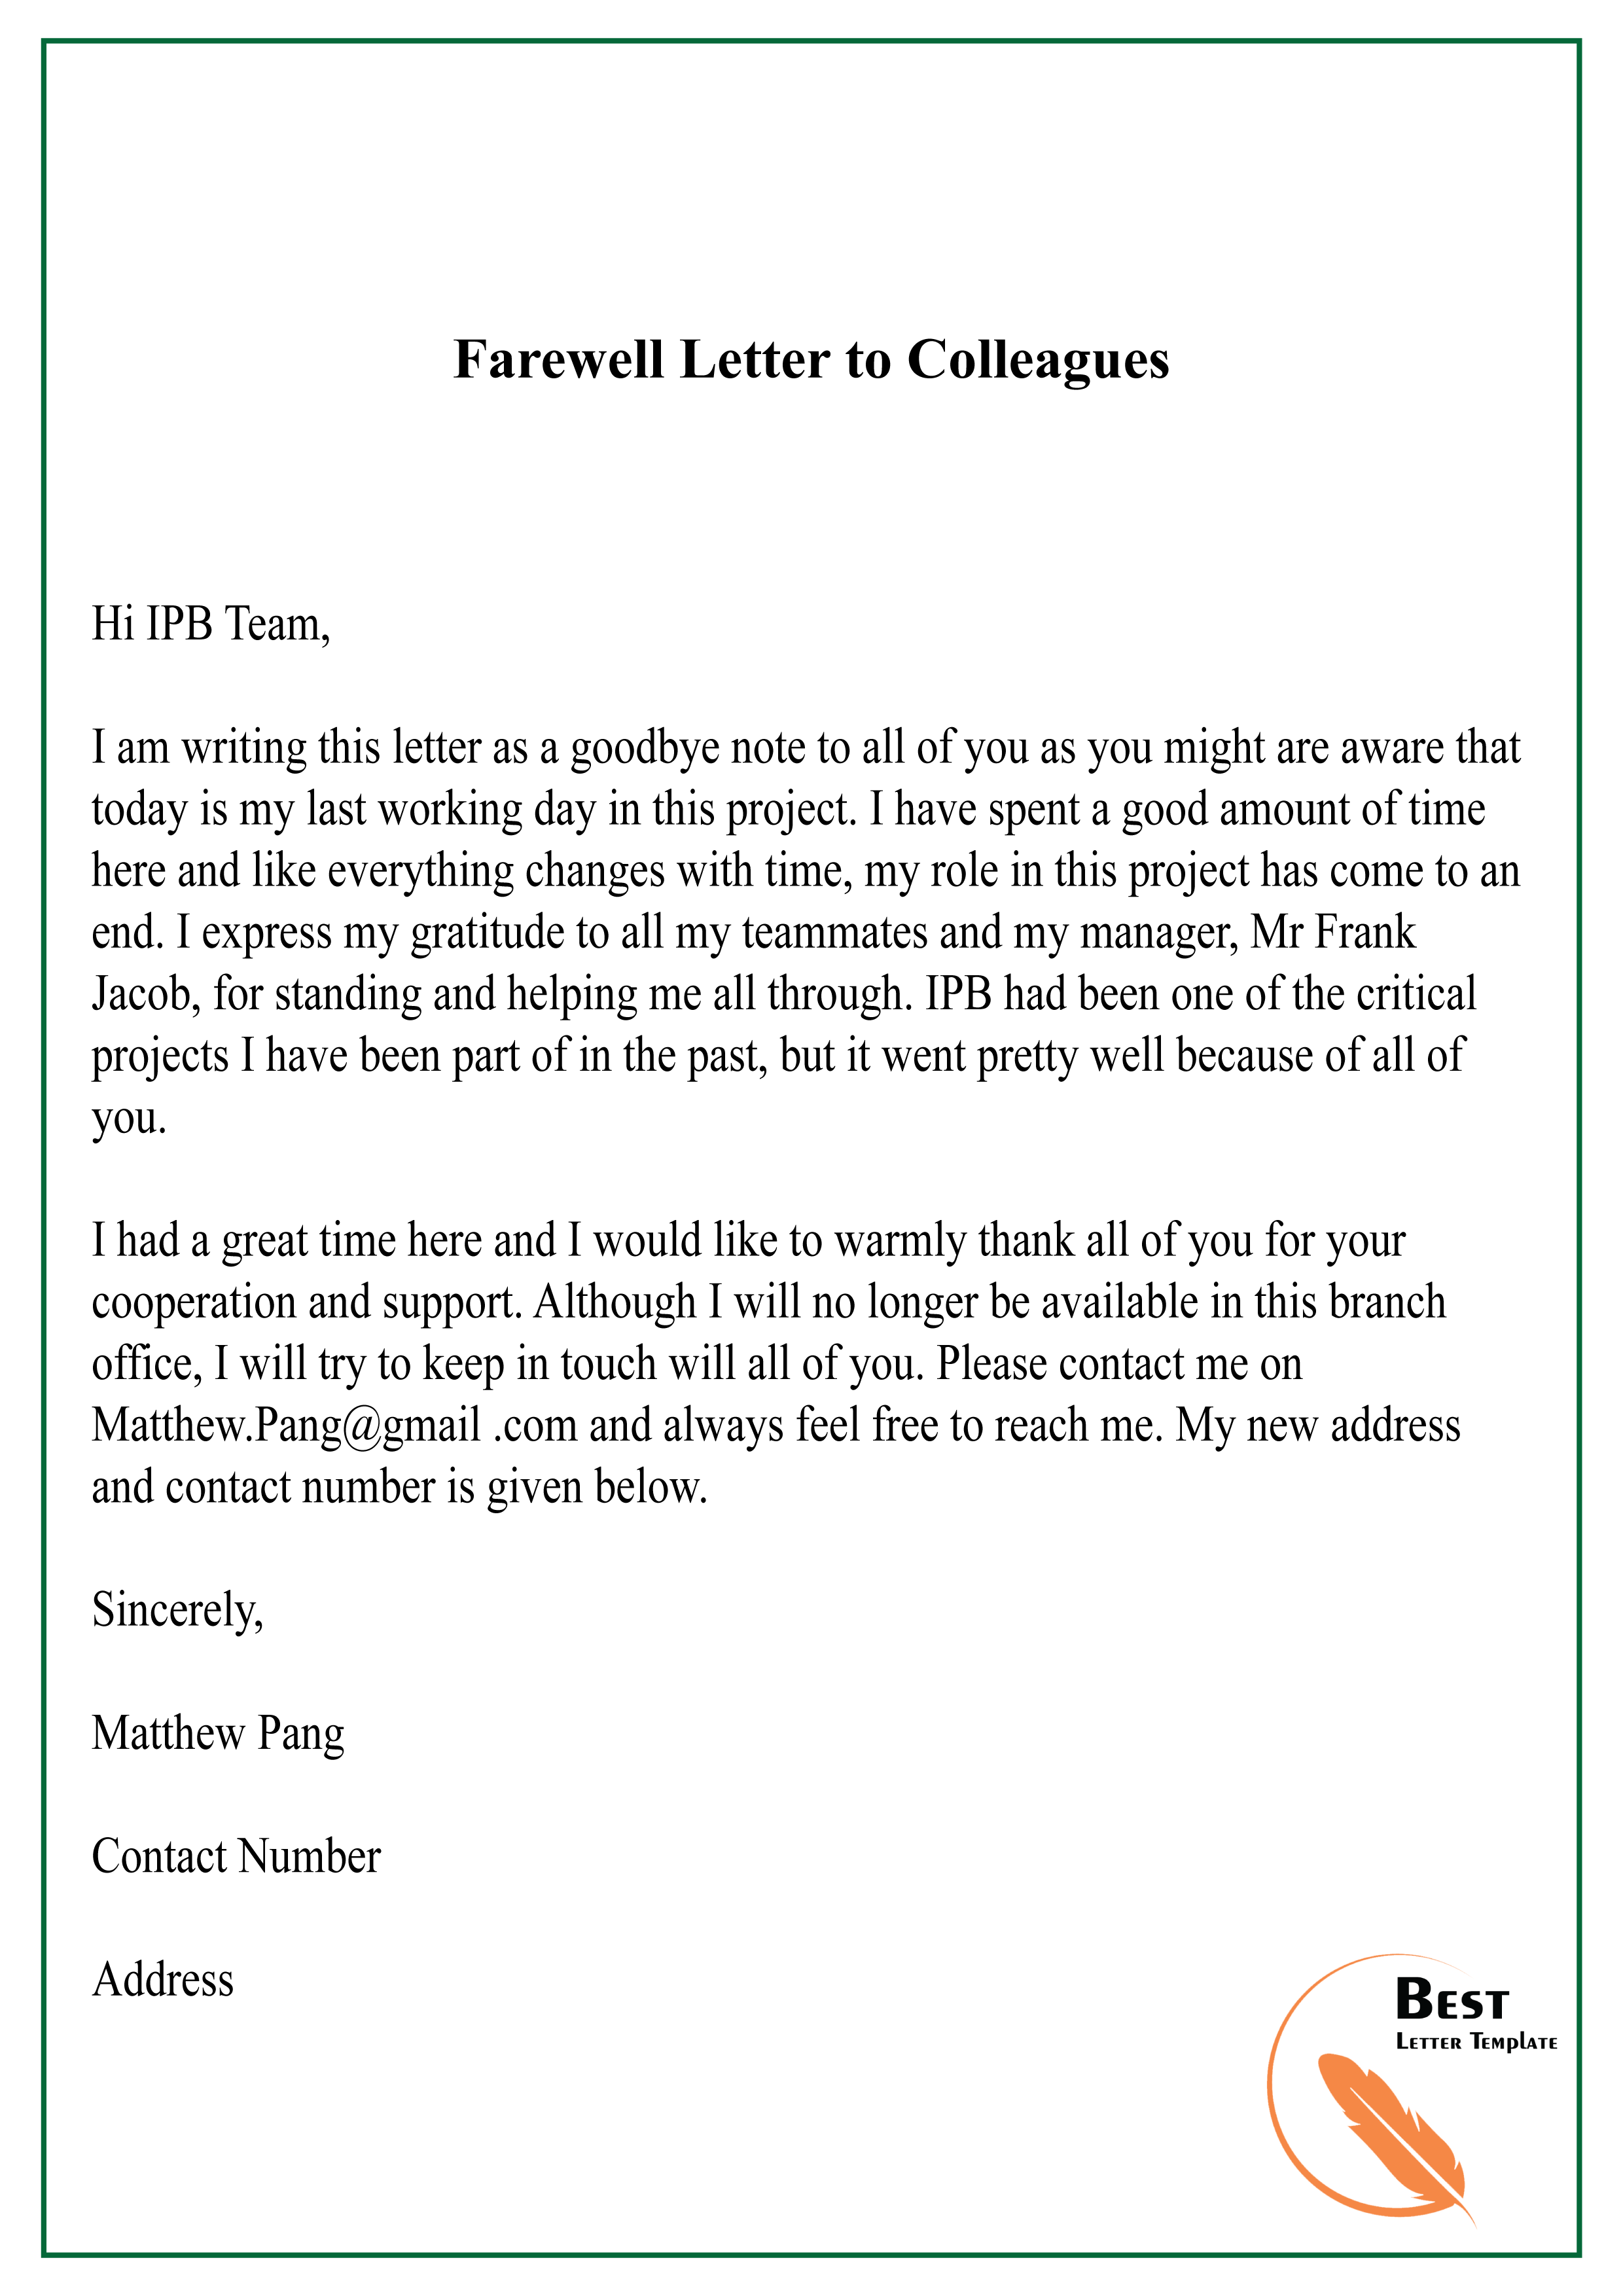 Farewell Letter to Colleagues-01 - Best Letter Template